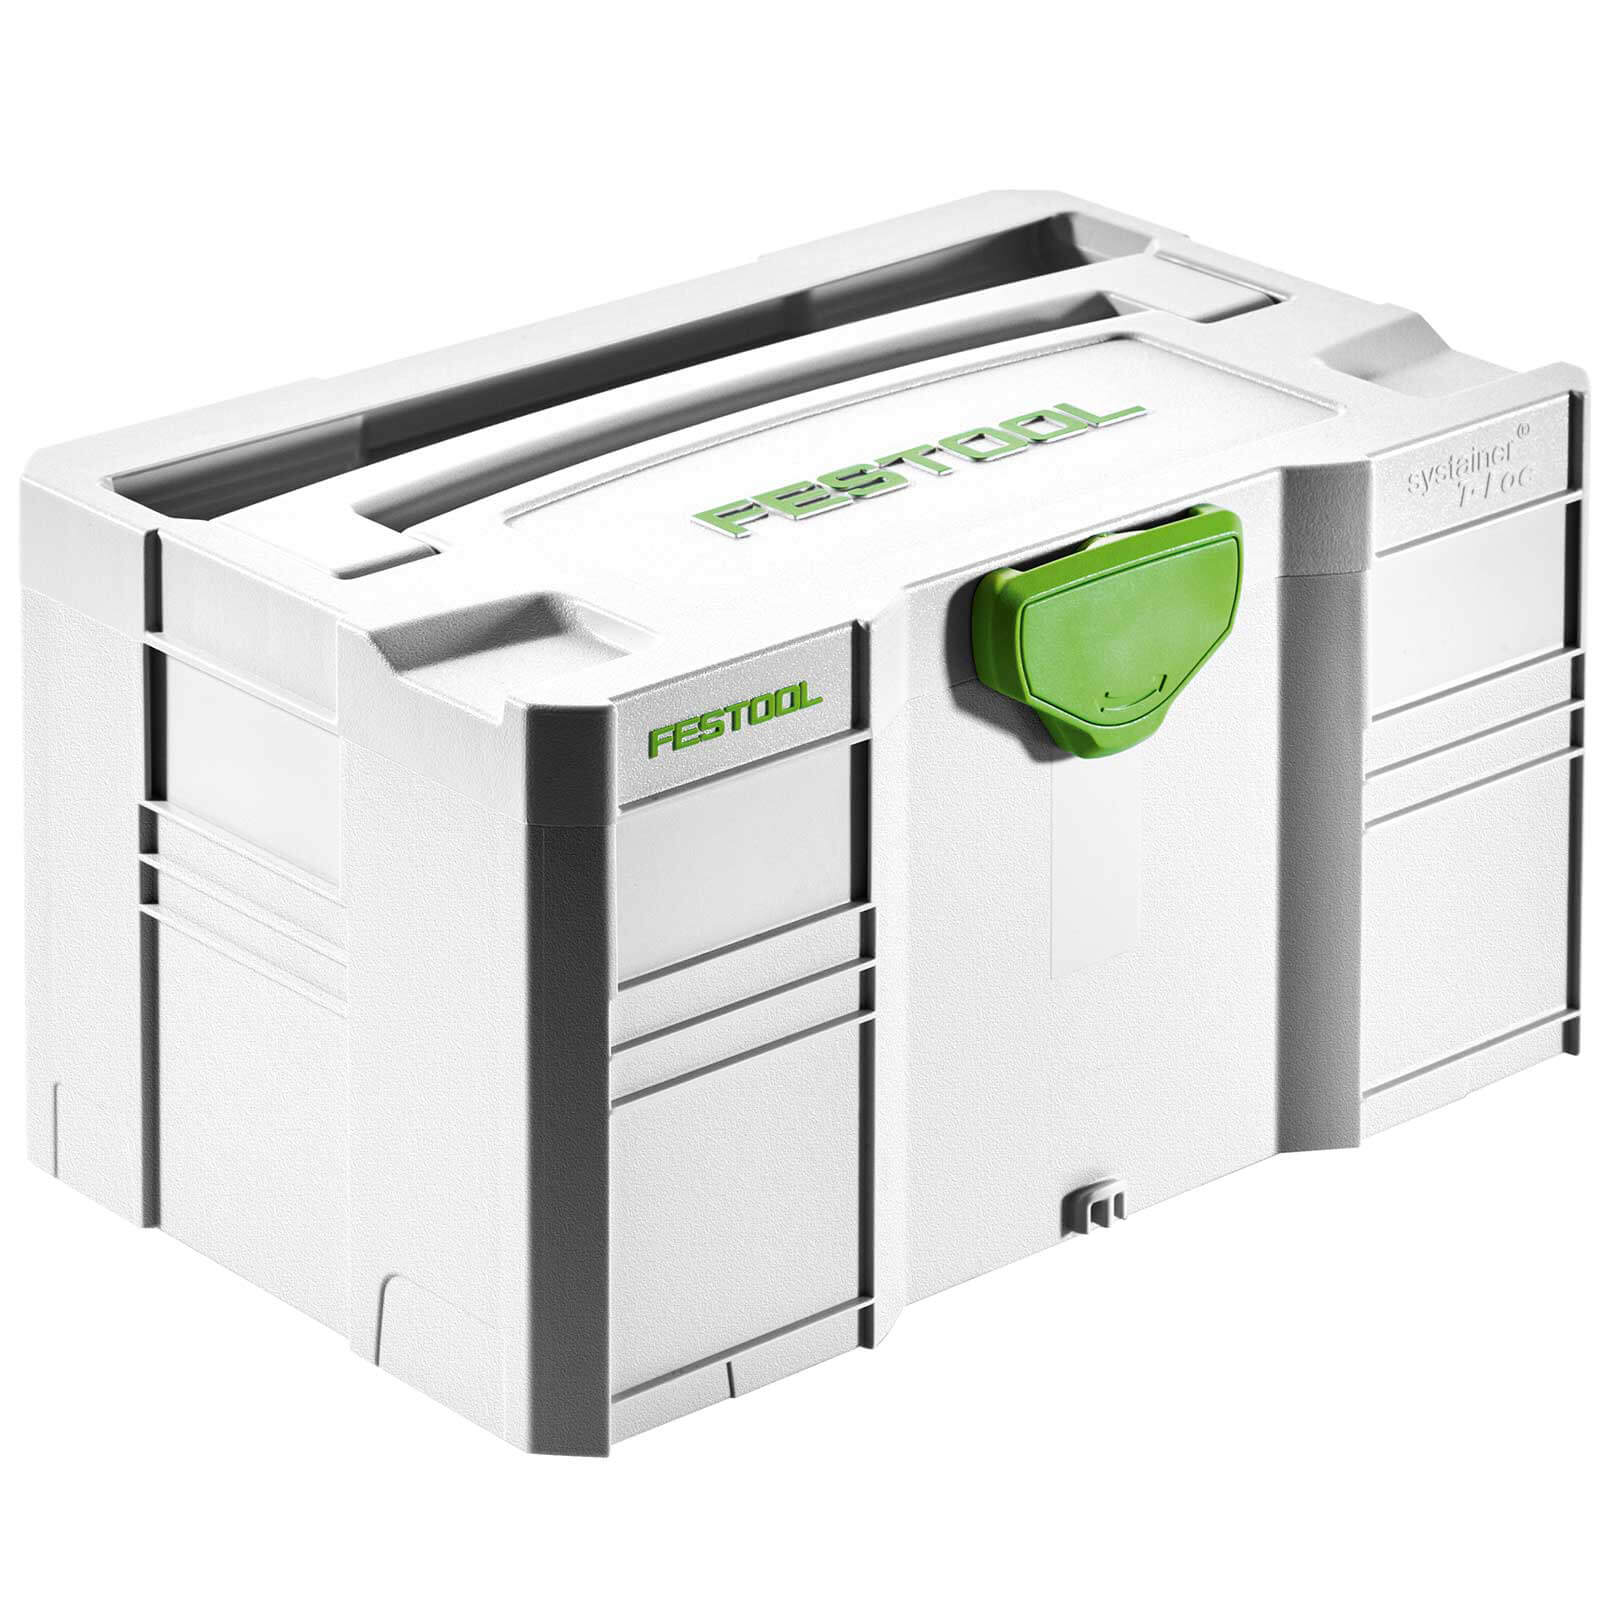 Photo of Festool Systainer Sys-mini 3 Tl Tool Case